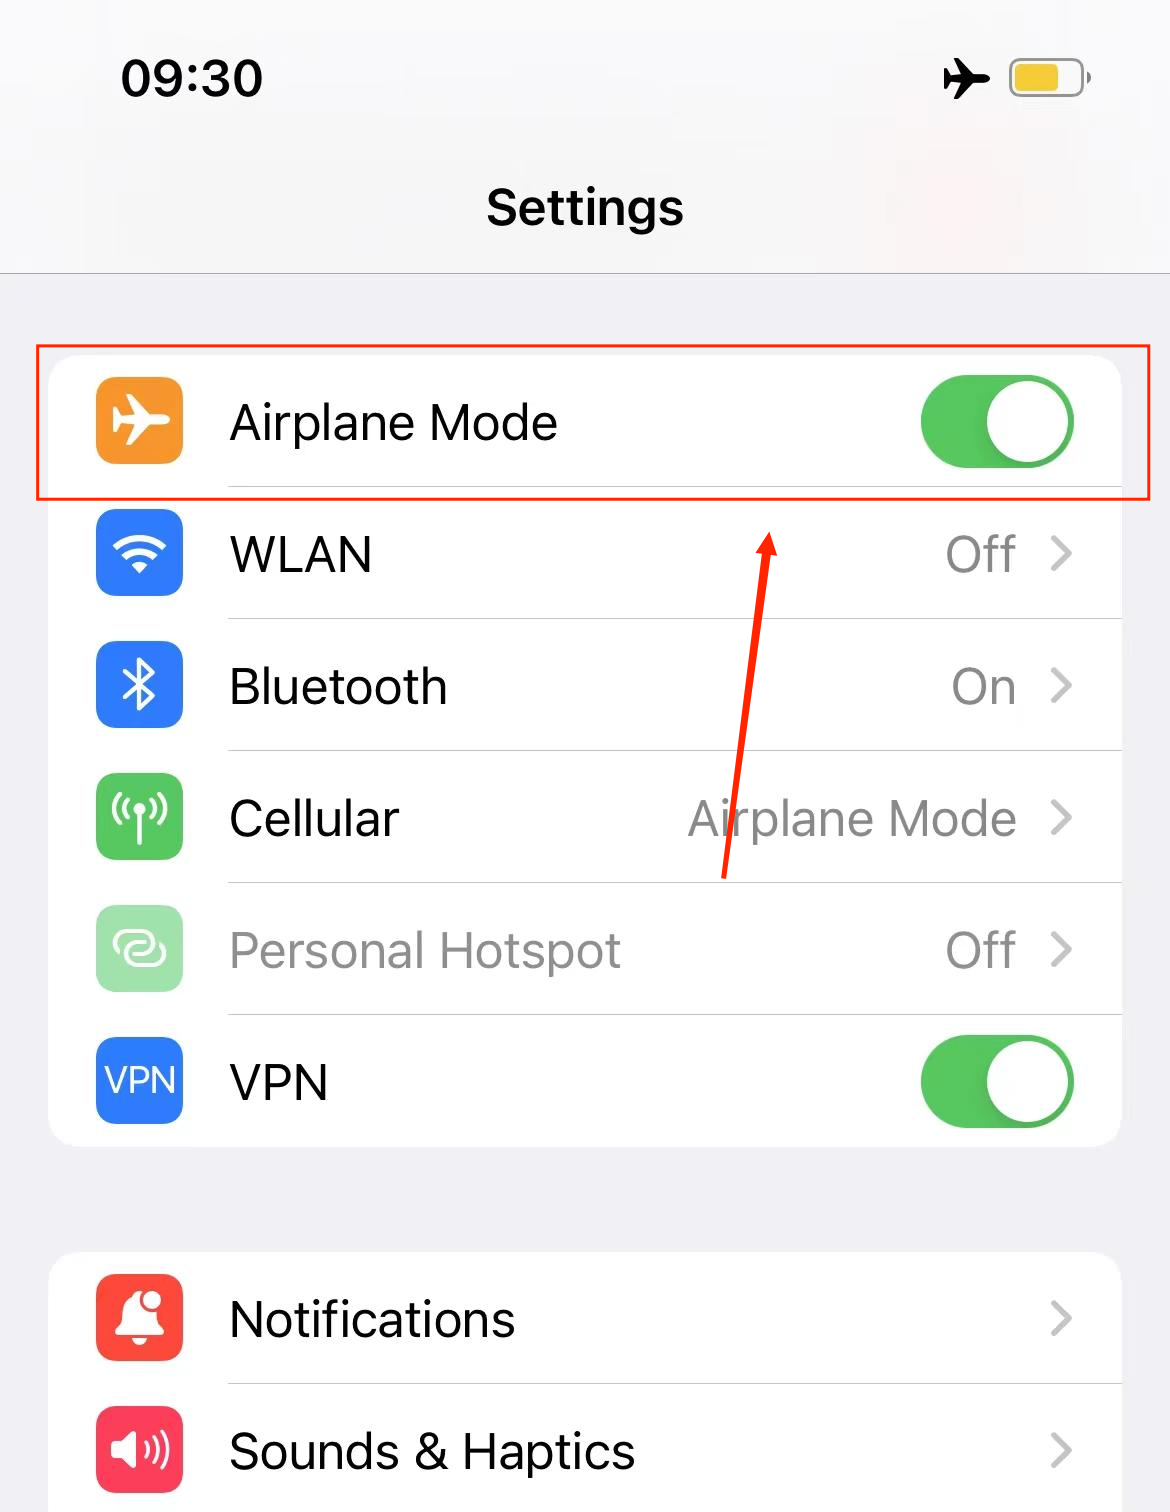 How to pause Life360 without anyone knowing by turning on airplain mode